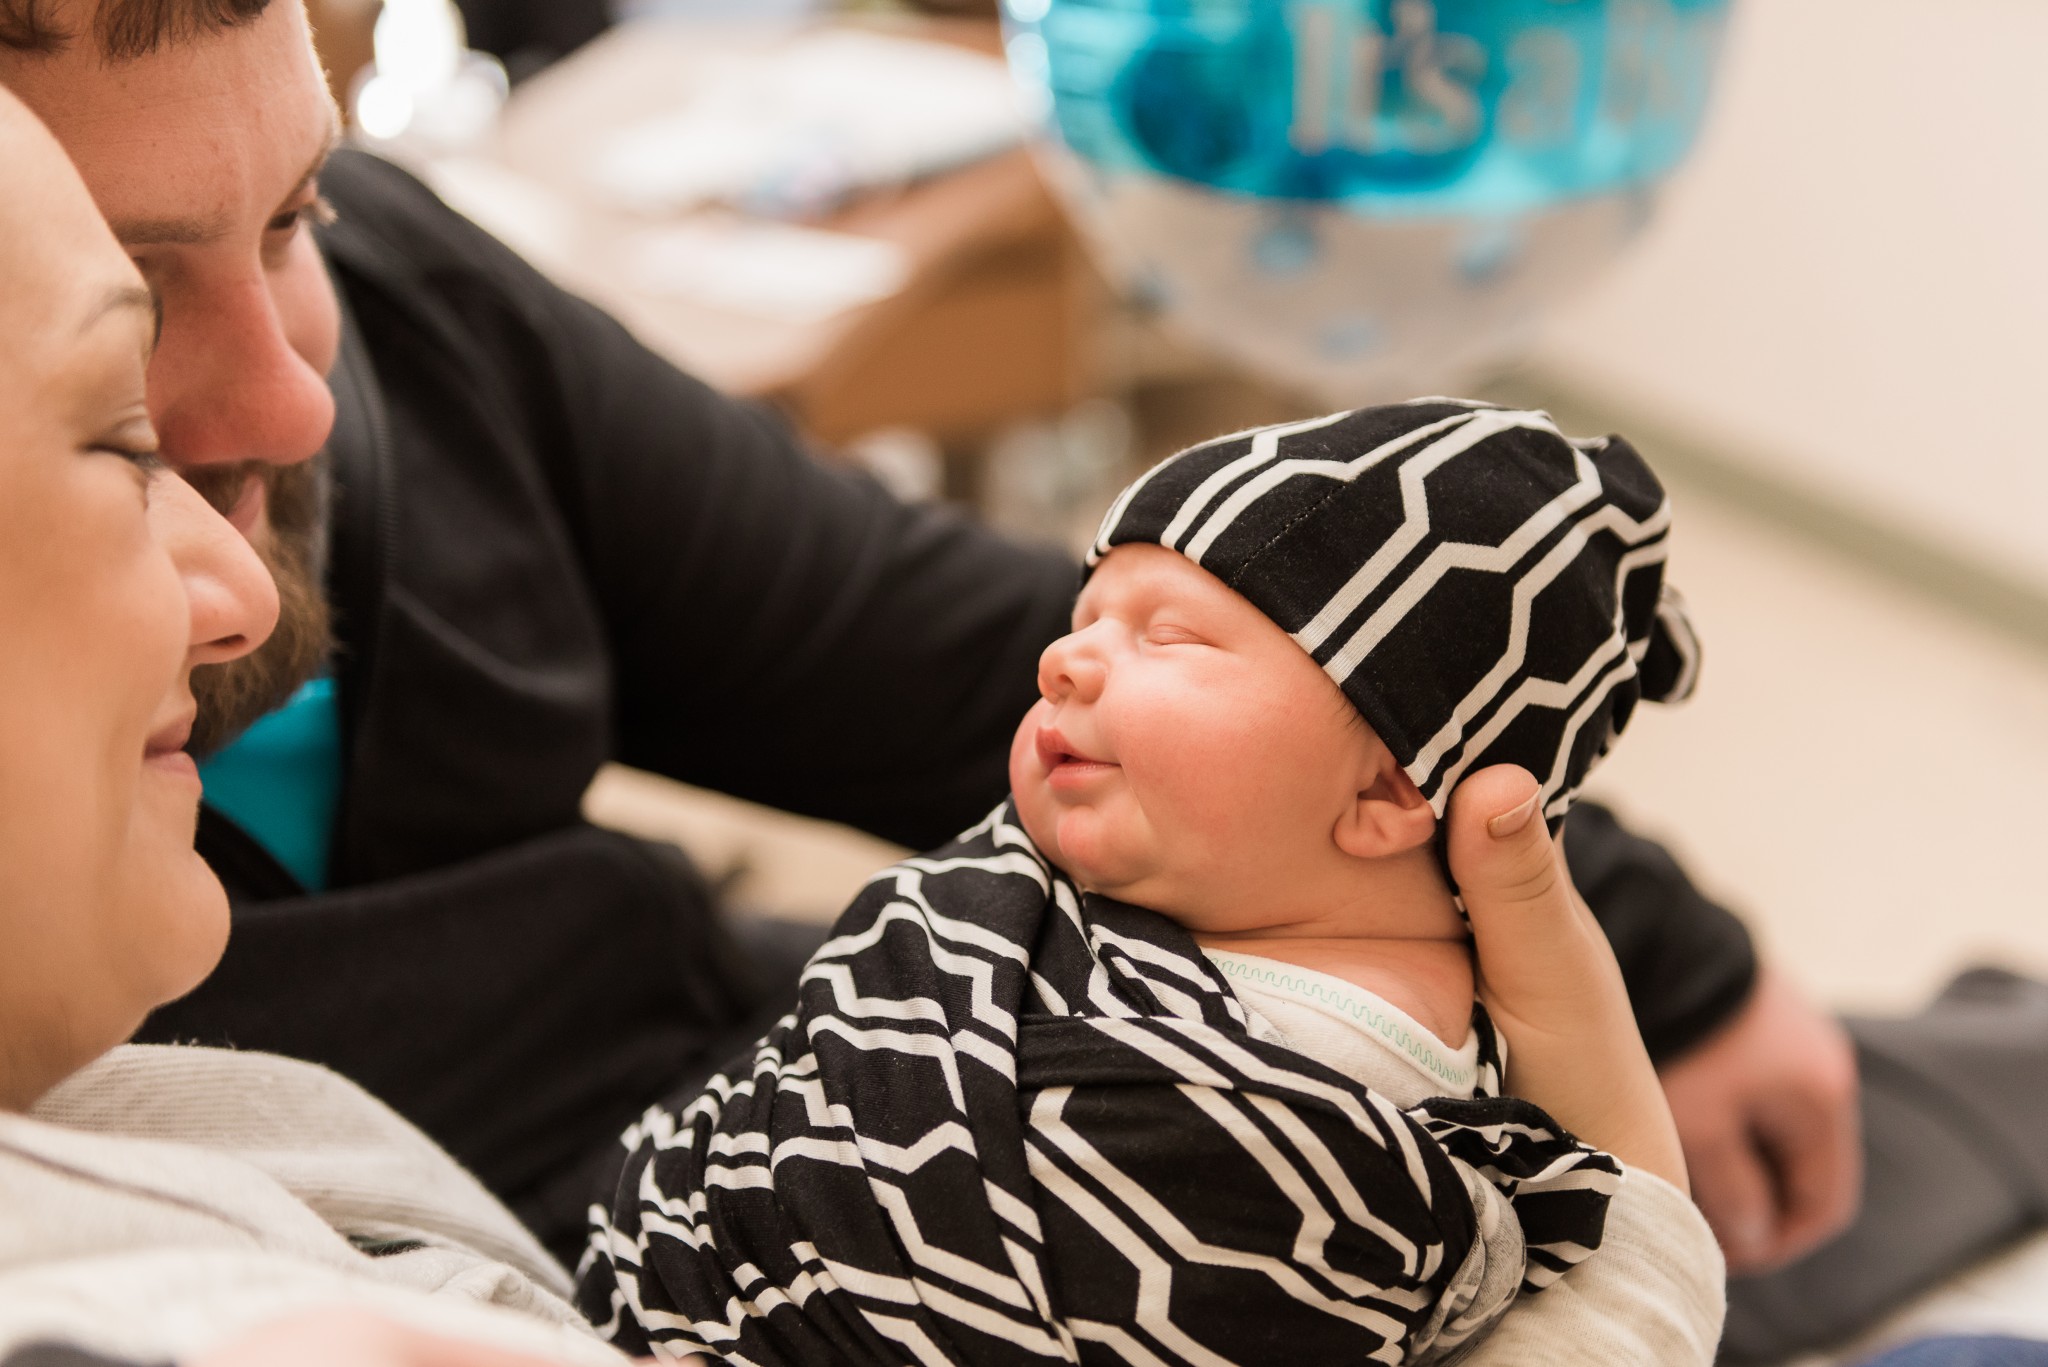 A baby boy wearing a black and white geometric swaddle is held by his parents as they look on during their photography session in a Pittsburgh hospital.